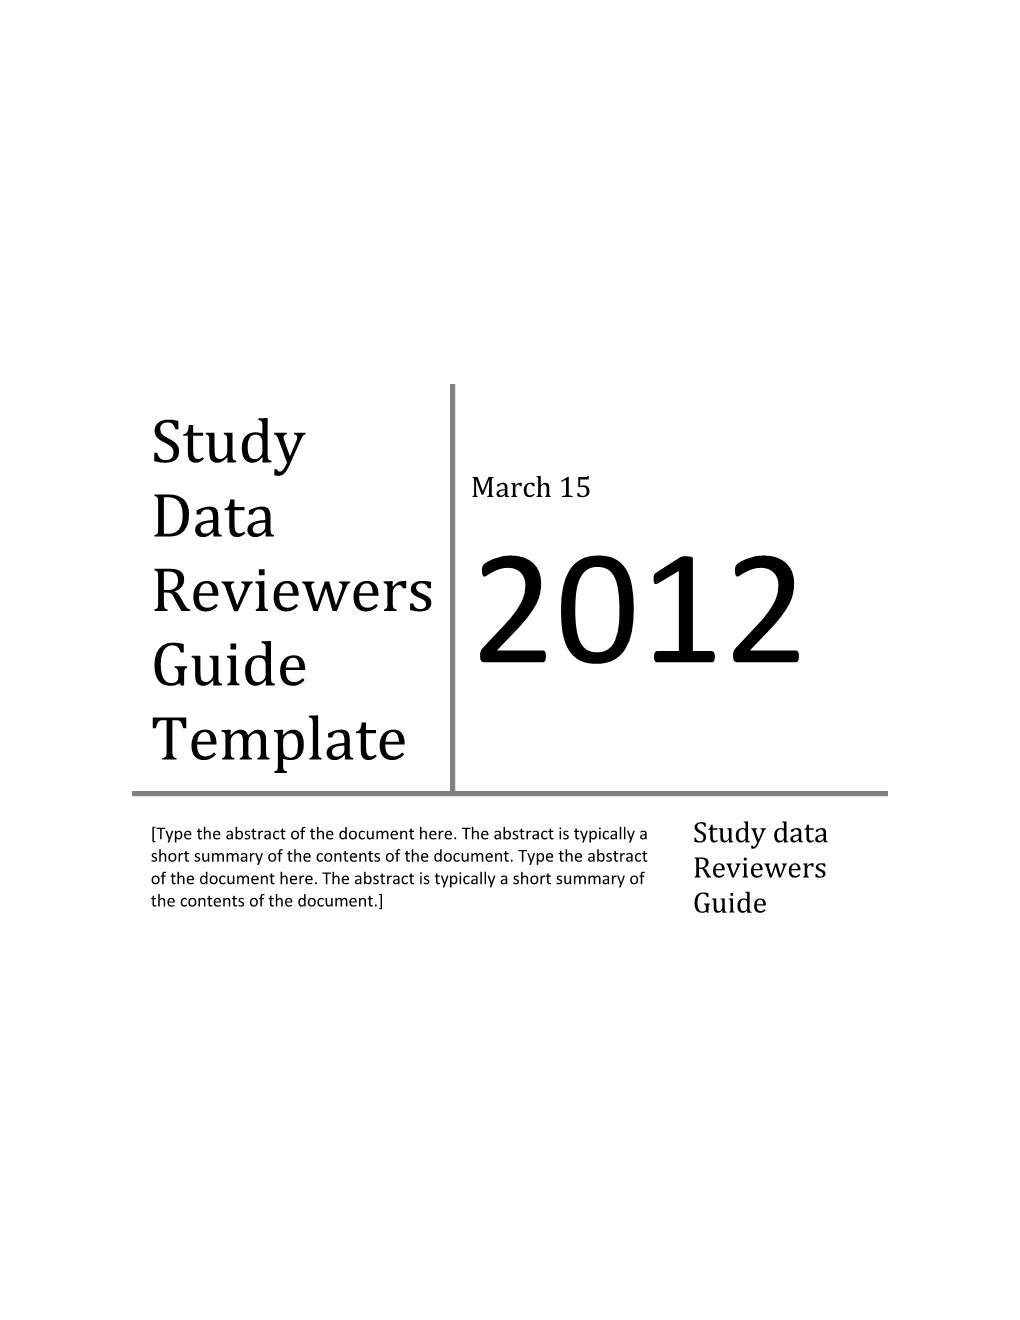 Study Data Reviewers Guide Template